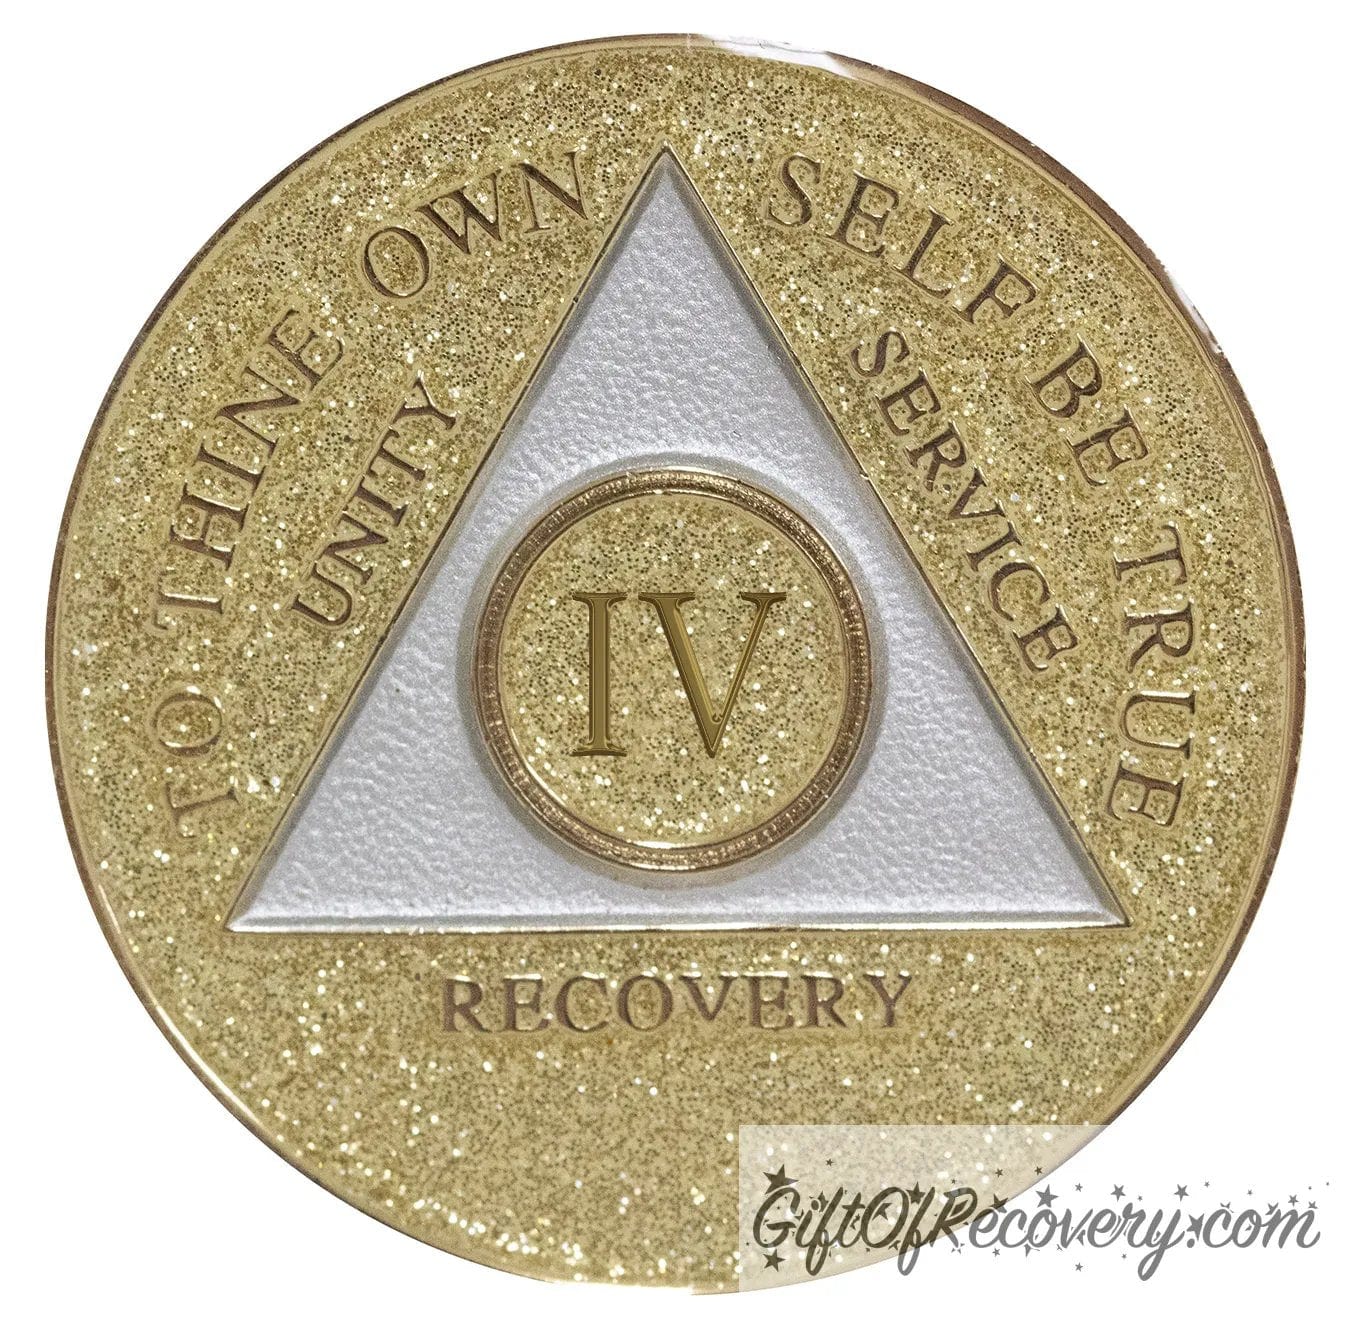 4 year AA medallion Gold glitter, with the triangle pearl white and to thine own self be true, unity, service, recovery, and the roman numeral embossed with 14k gold-plated brass, the recovery medallion is sealed with resin for a shiny finish that will last and is scratch proof.